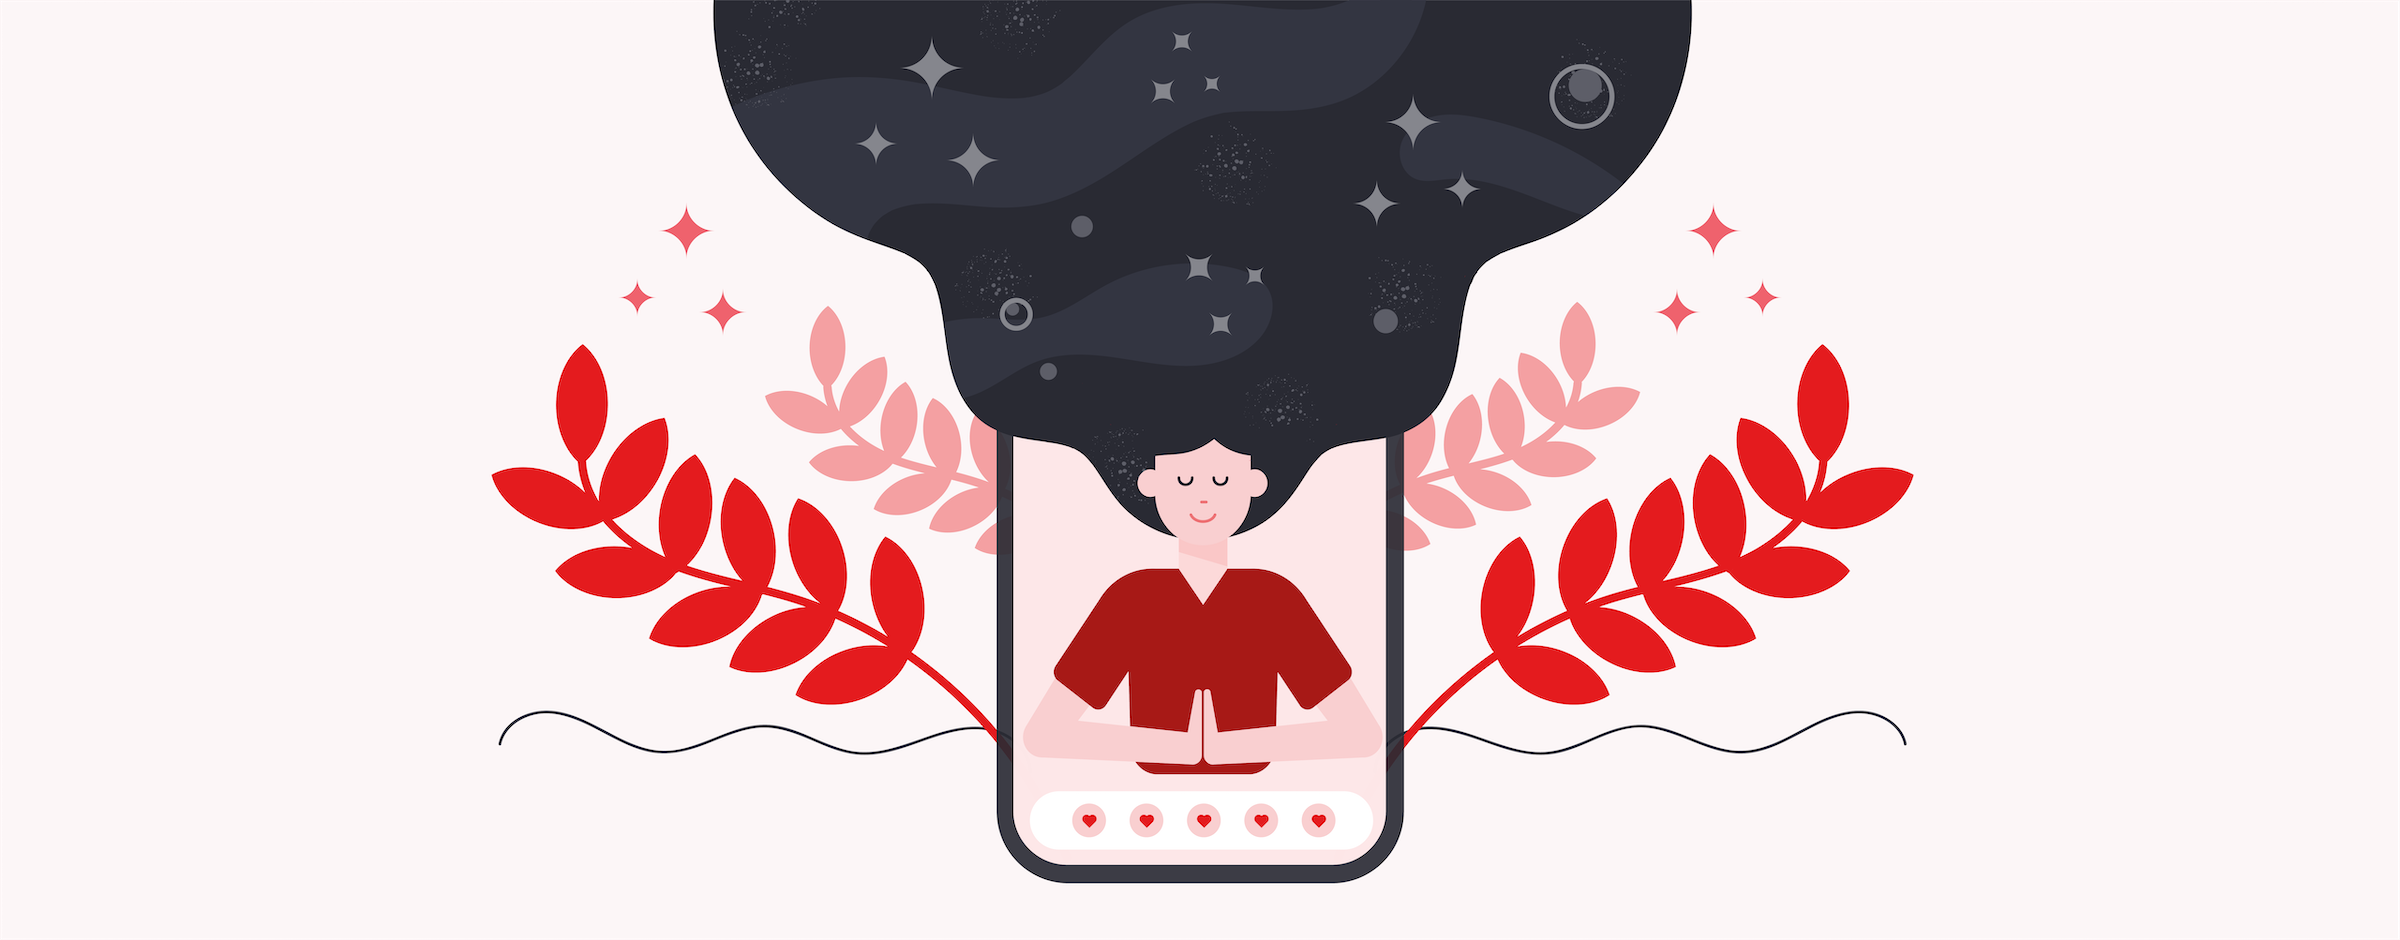 The best mental health apps